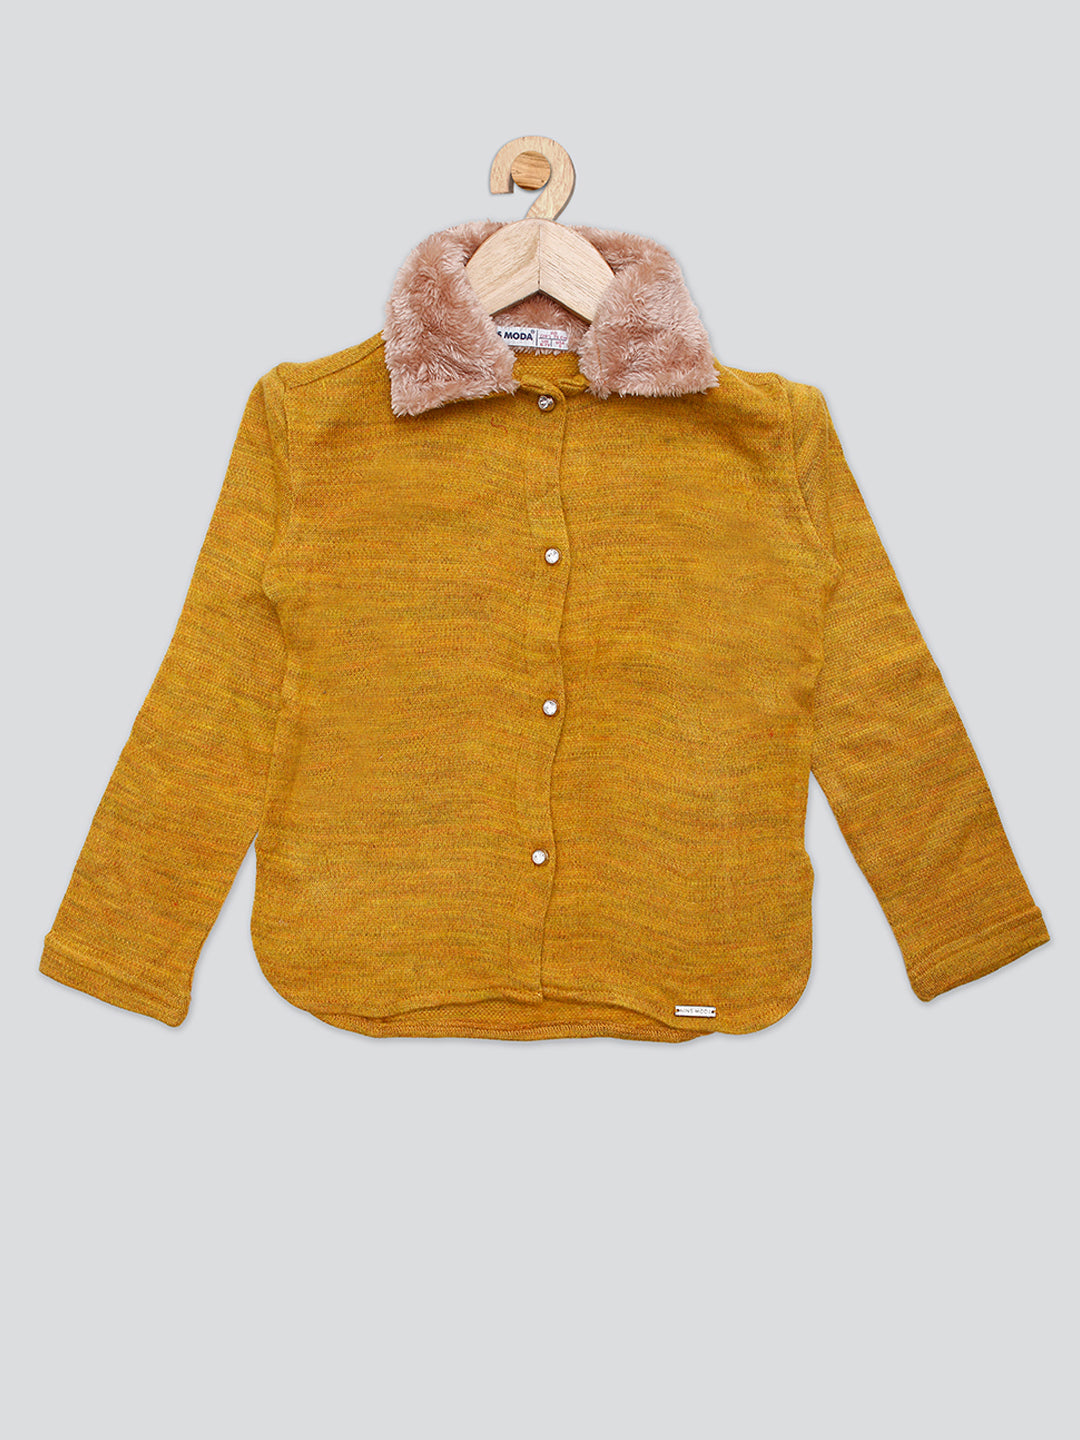 Pampolina Girls Wollen Top With Collar-Mustard